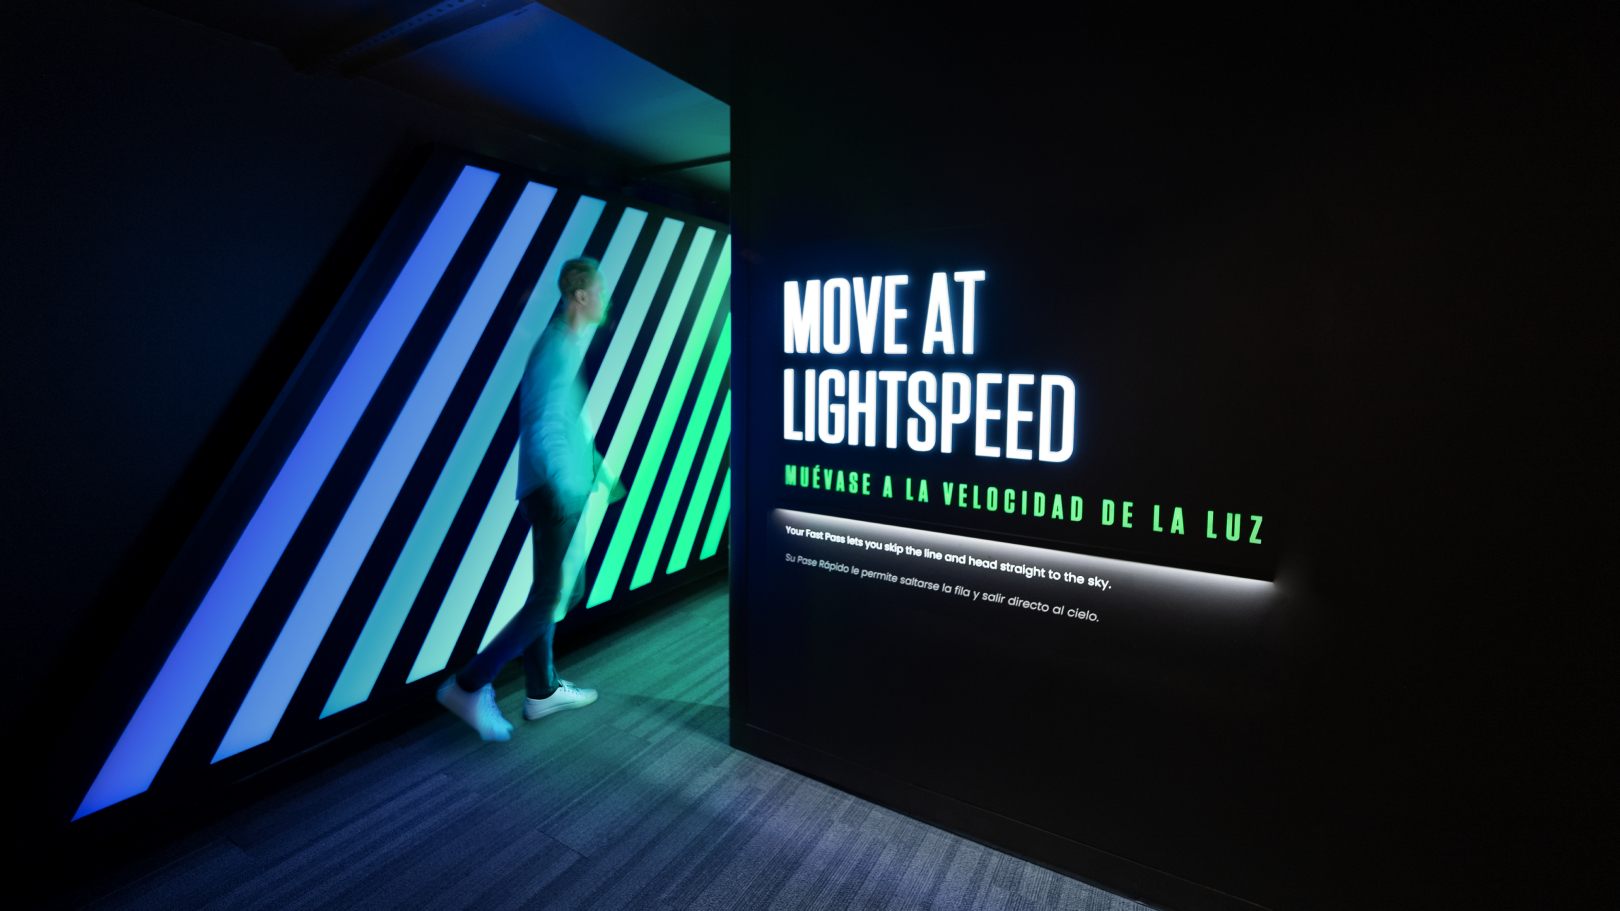 A person entering the Fast Pass line. Text on the wall says "Move at Lightspeed". Wall is glowing blue and green.